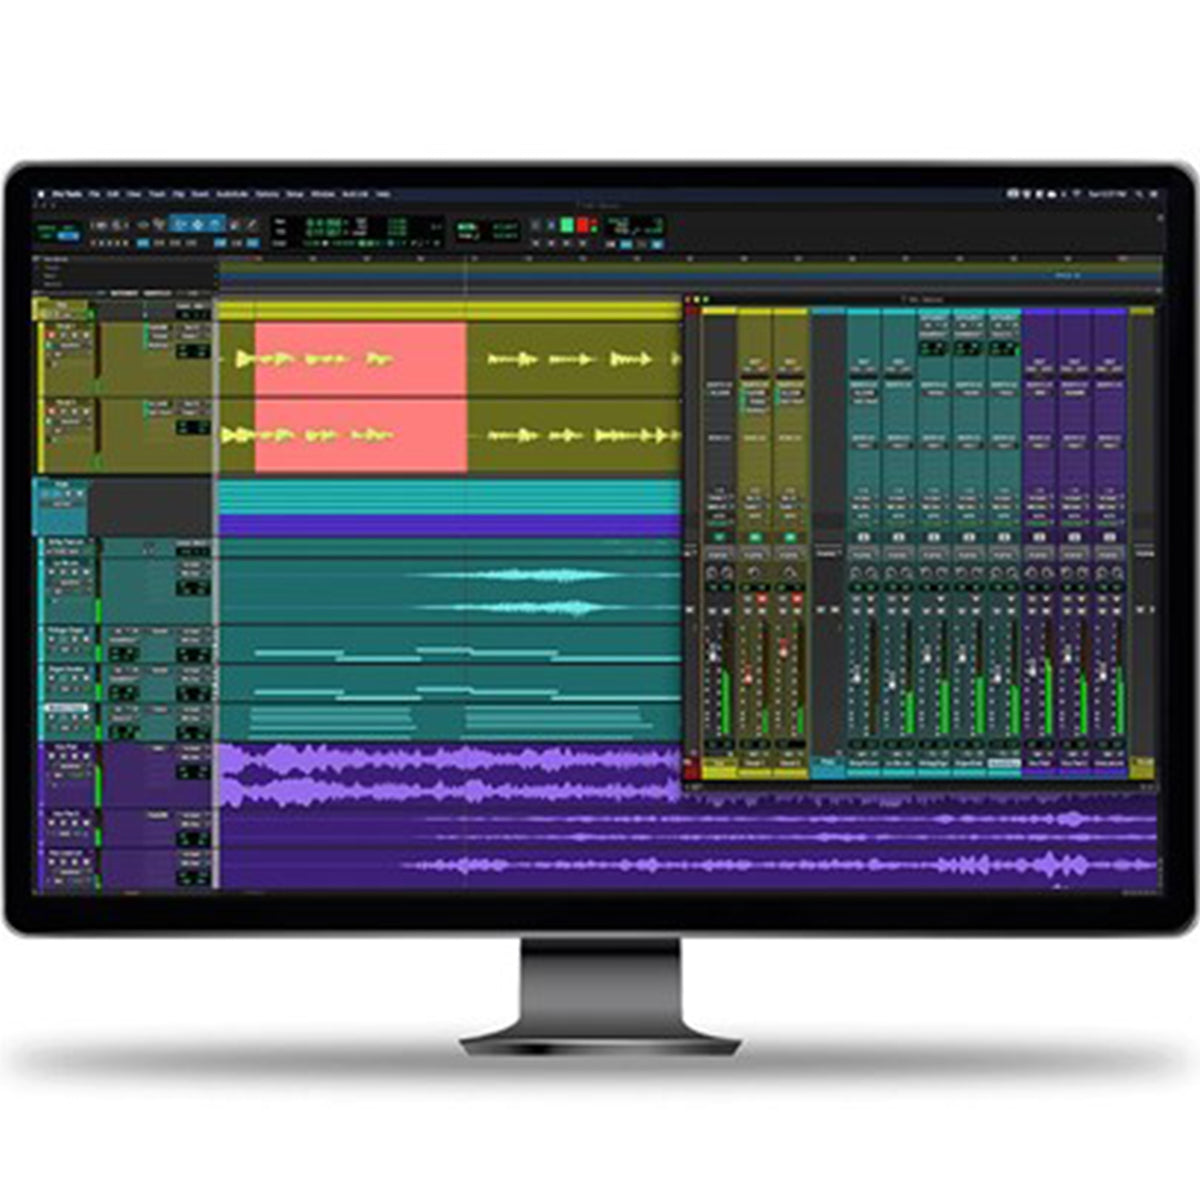 Pro Tools Tutorials - Learn Pro Tools Inside and Out